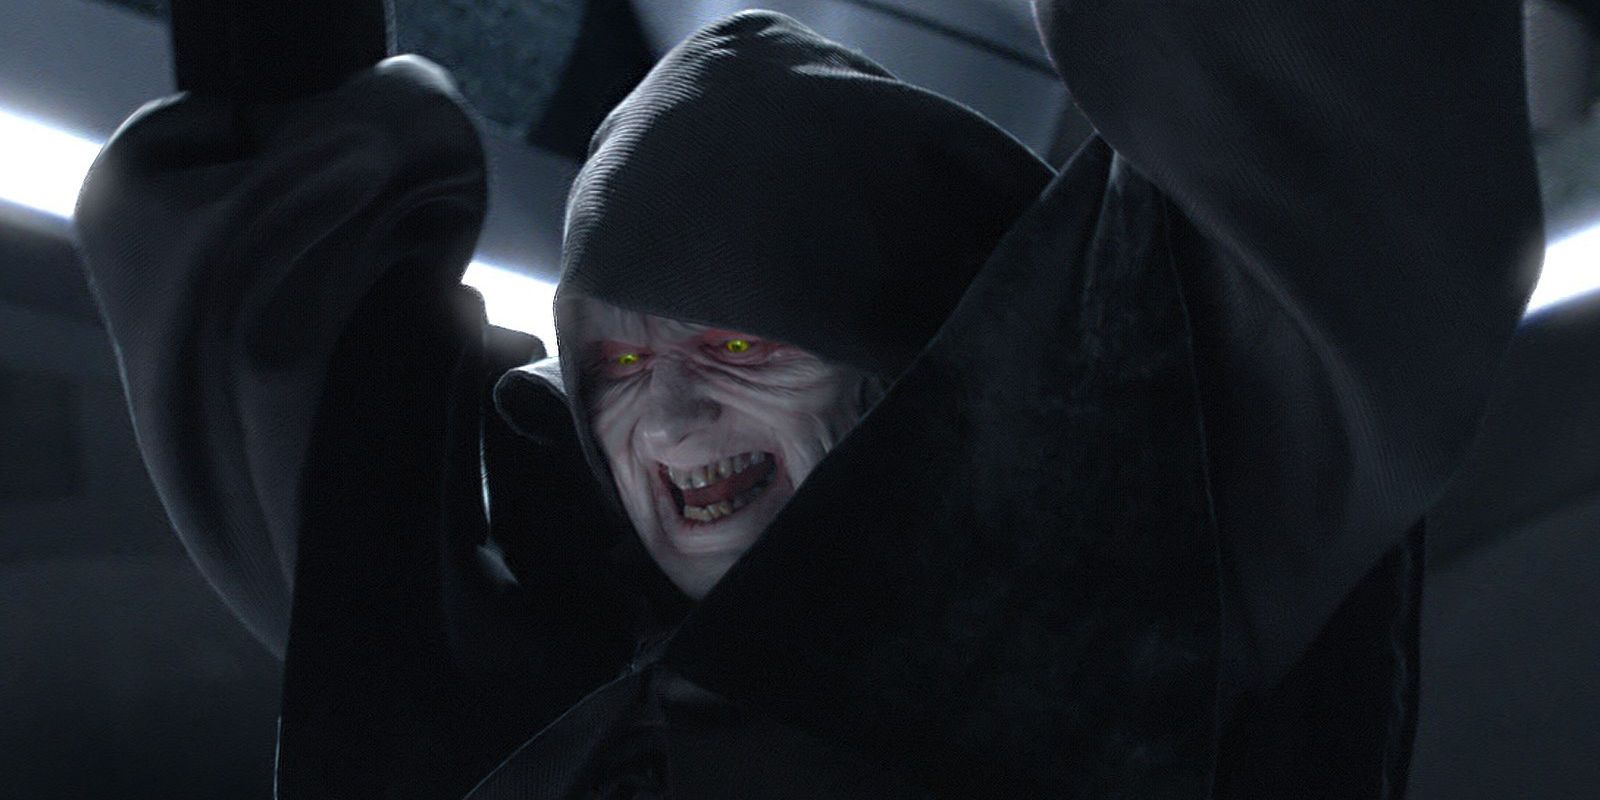 Emperor Palpatine from Revenge of the Sith